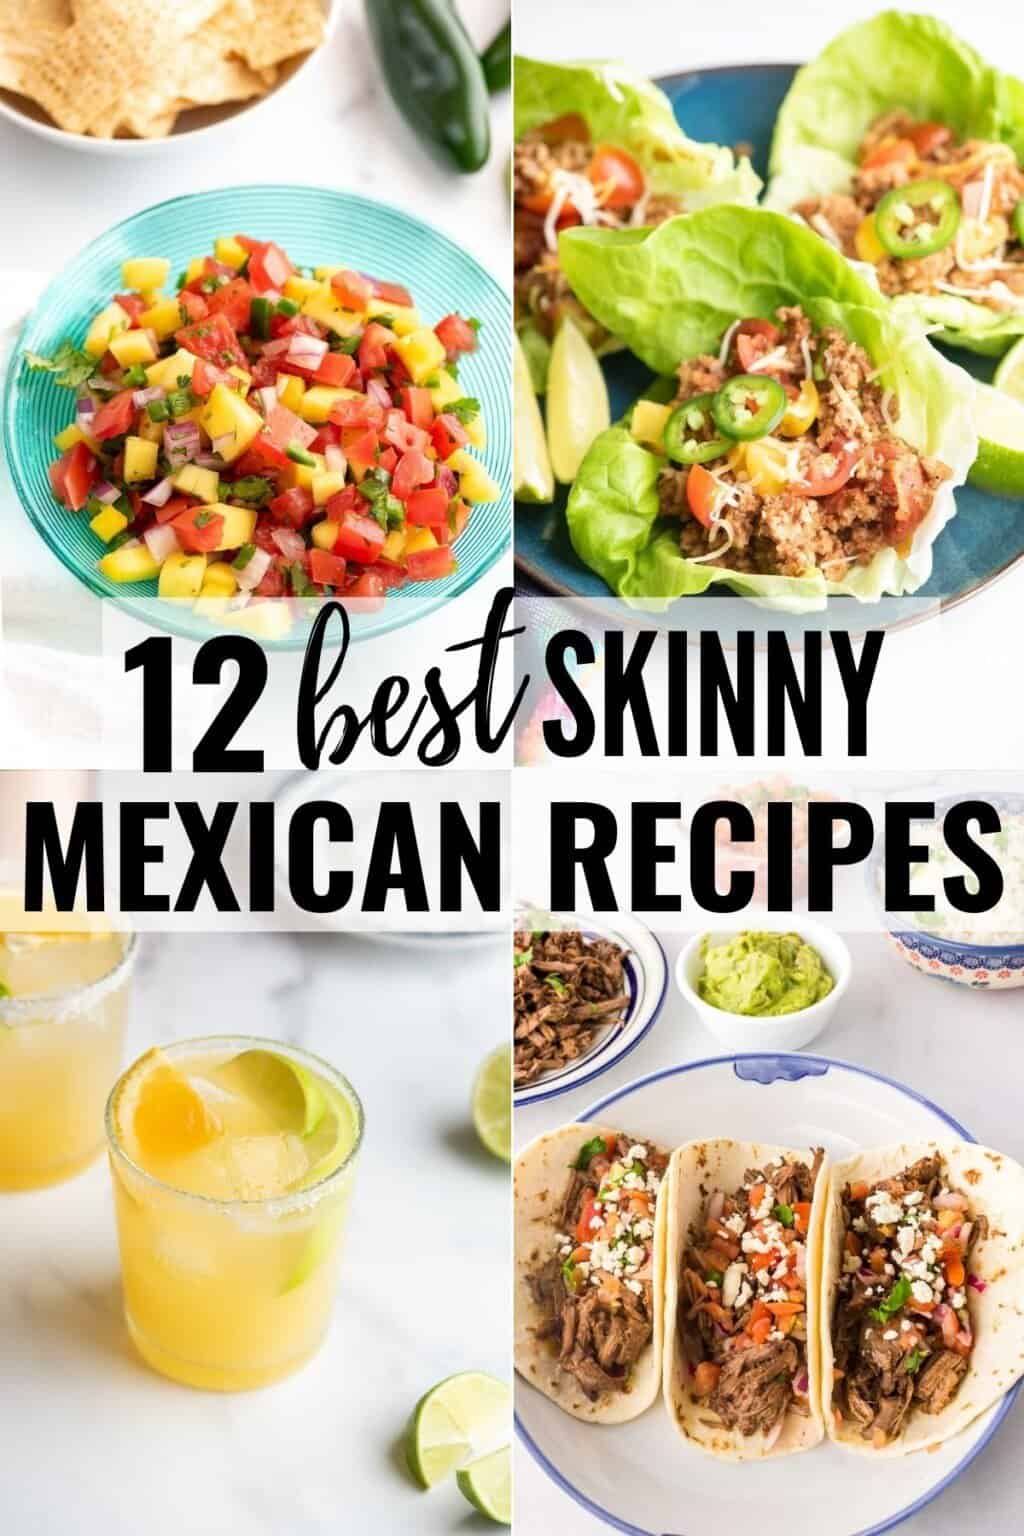 Healthy Mexican Food Recipes Lower Calorie Make It Skinny Please 4773